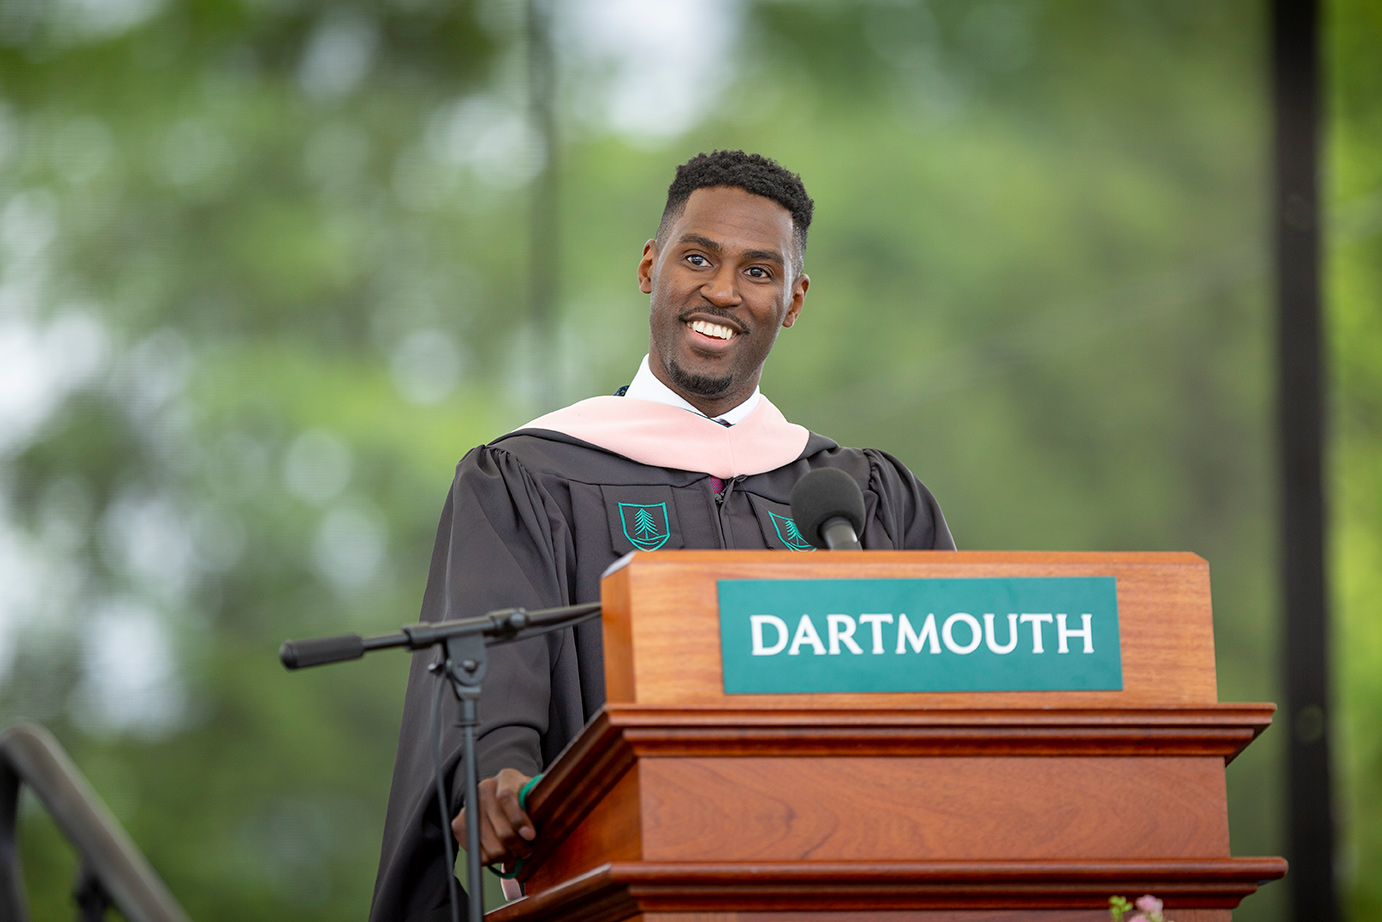 Student speaker Edgard E. Ngono, MPH’21 reminded his classmates their public health health expertise is needed now, more so than ever before.